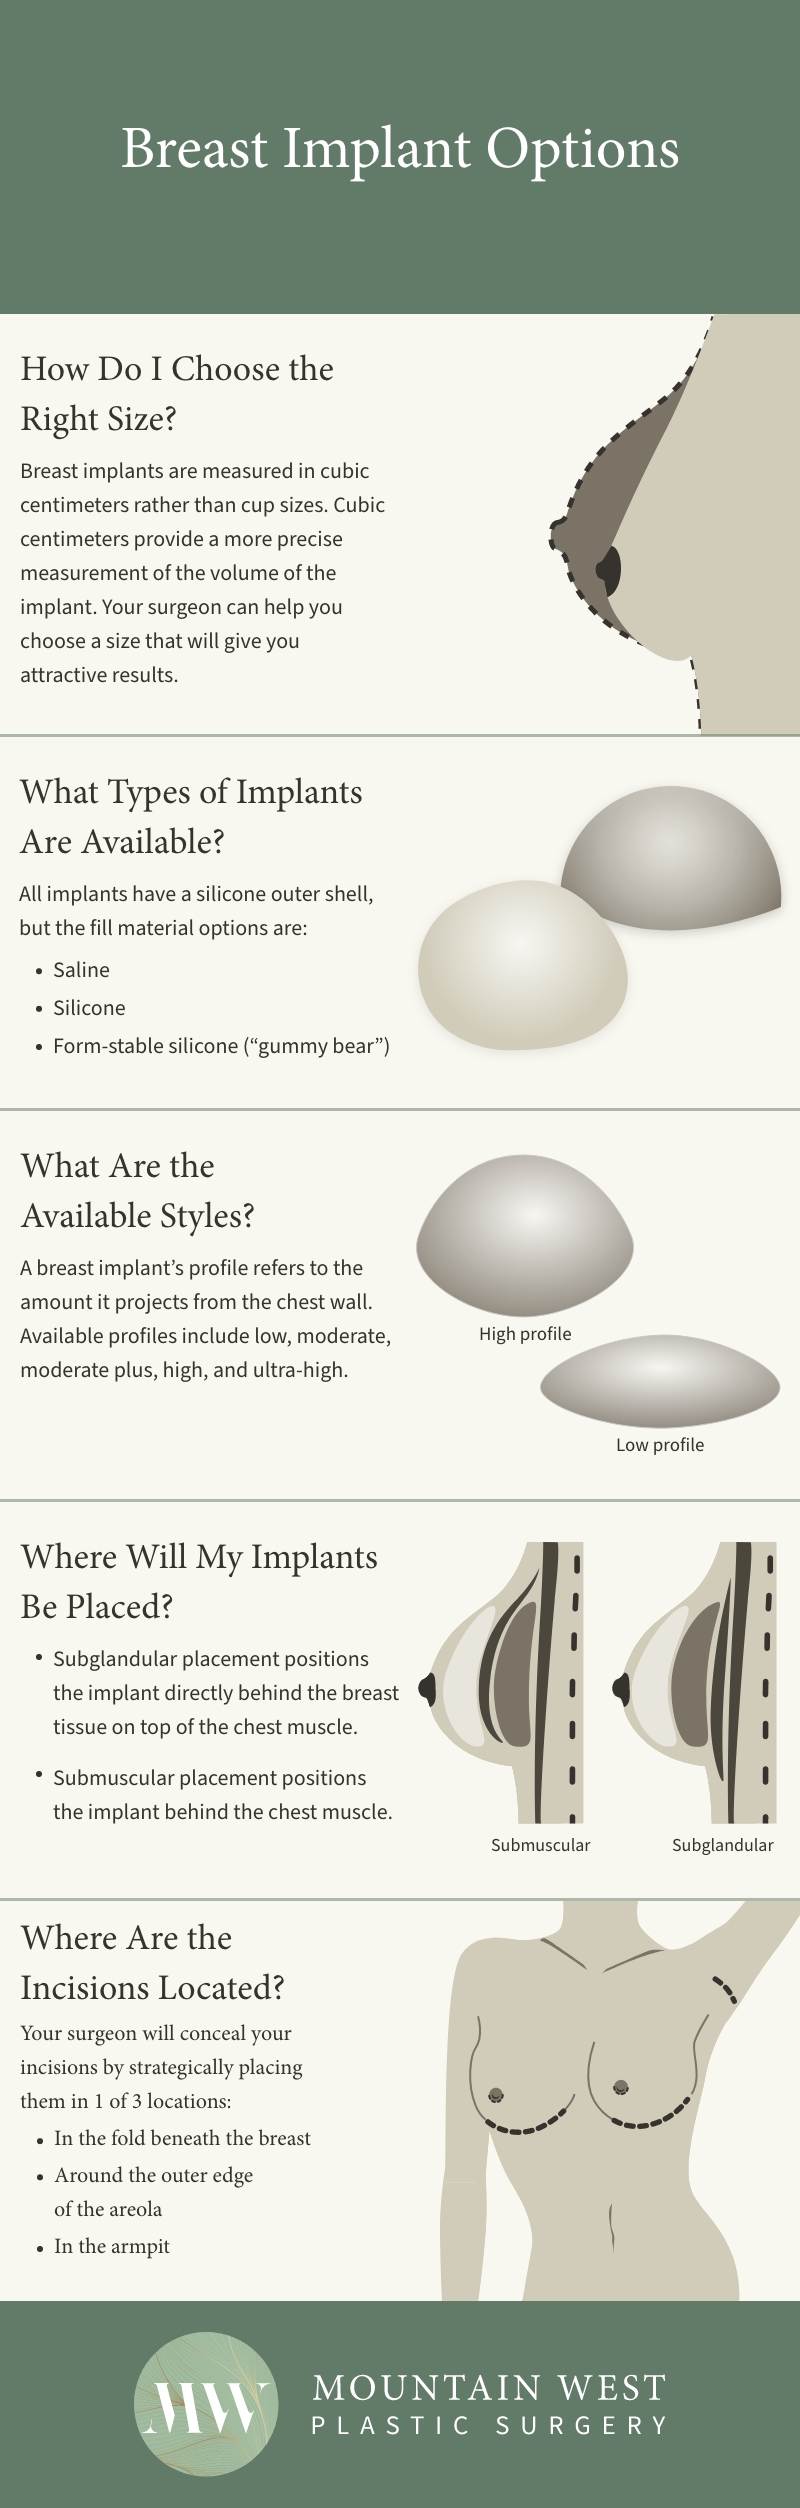 INFOGRAPHIC: Breast Implant Options. Text- 

How Do I Choose the Right Size? 

Breast implants are measured in cubic centimeters rather than cup sizes. Cubic centimeters provide a more precise measurement of the volume of the implant. Your surgeon can help you choose a size that will give you attractive results.

What Types of Implants Are Available?

All implants have a silicone outer shell, but the fill material options are Saline, Silicone, and Form-stable silicone or 'Gummy Bear' implants.

What are the Available Styles?

A breast implants profile refers to the amount it projects from the chest wall. Available profiles include low, moderate, moderate plus, high, and ultra high.

Where Will My Implants Be Placed?

Subglandular placement positions the implant directly behind the breast tissue on top of the chest muscle. Submuscular placement positions the implant behind the chest muscle.

Where are the Incisions Located?

Your Surgeon will conceal your incisions by strategically placing them in 1 of 3 Locations. In the fold beneath the breast, around the outer edge of the areola, or in the armpit.